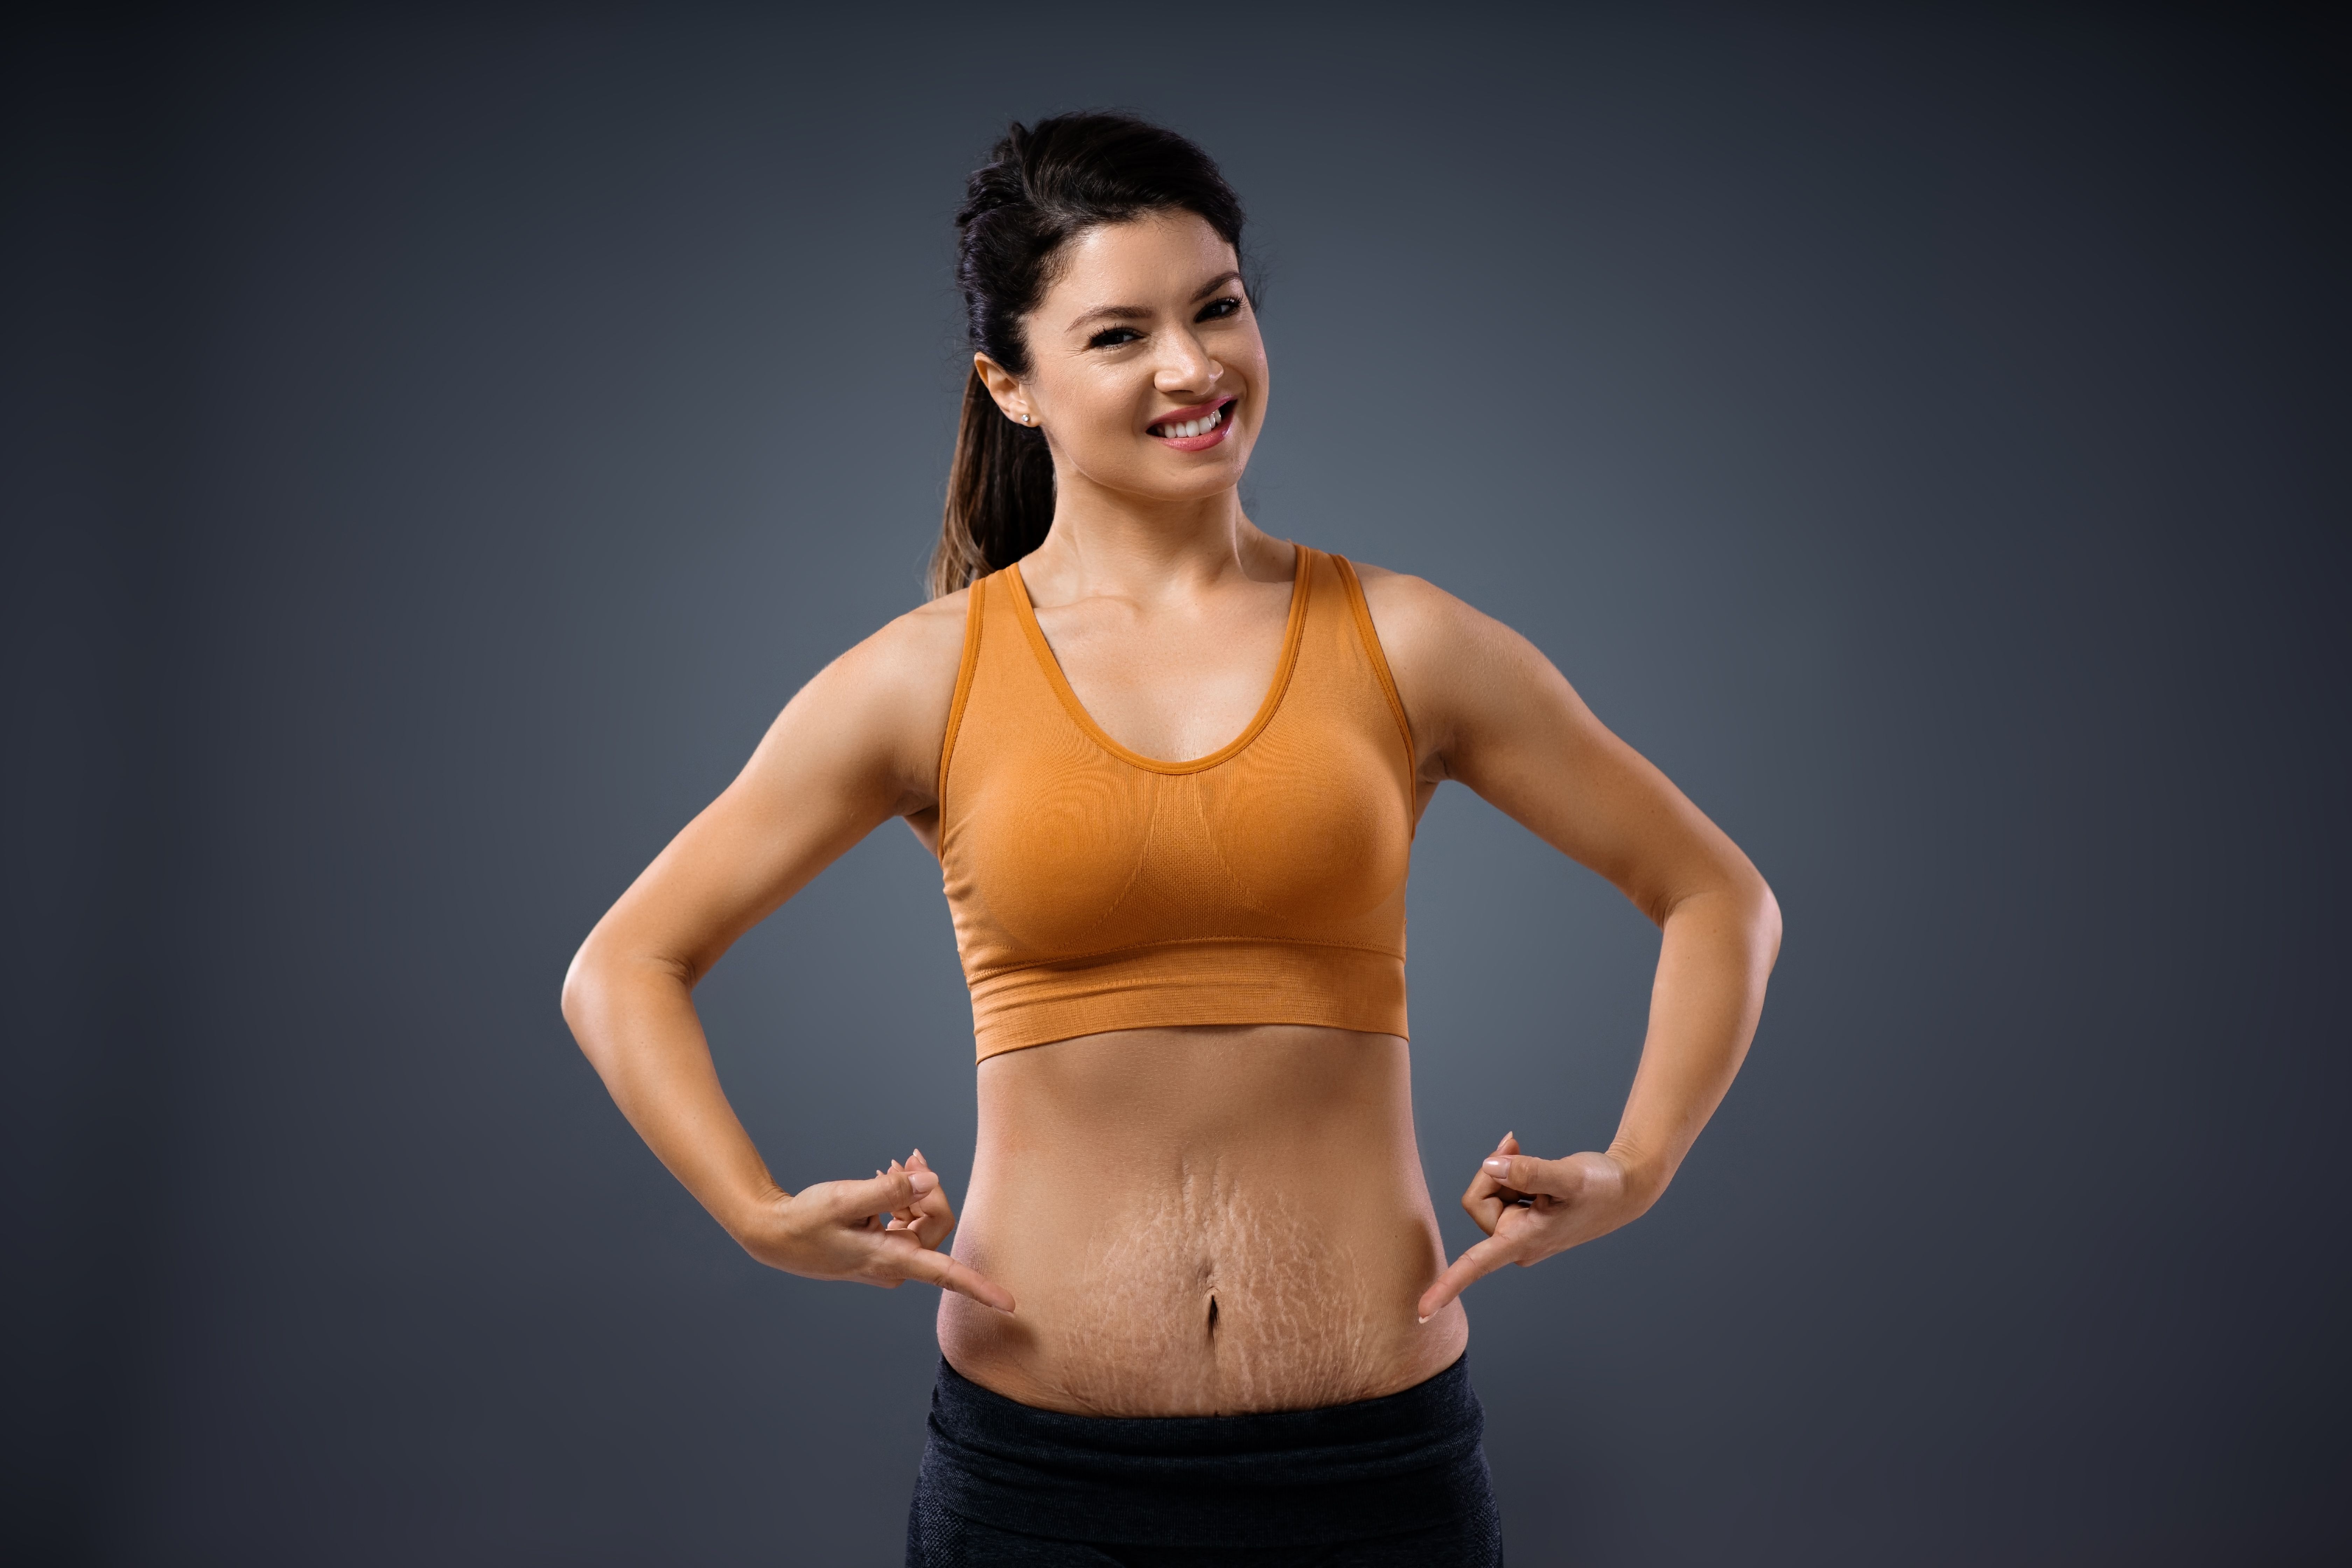 Does Exercise Make Stretch Marks Go Away?